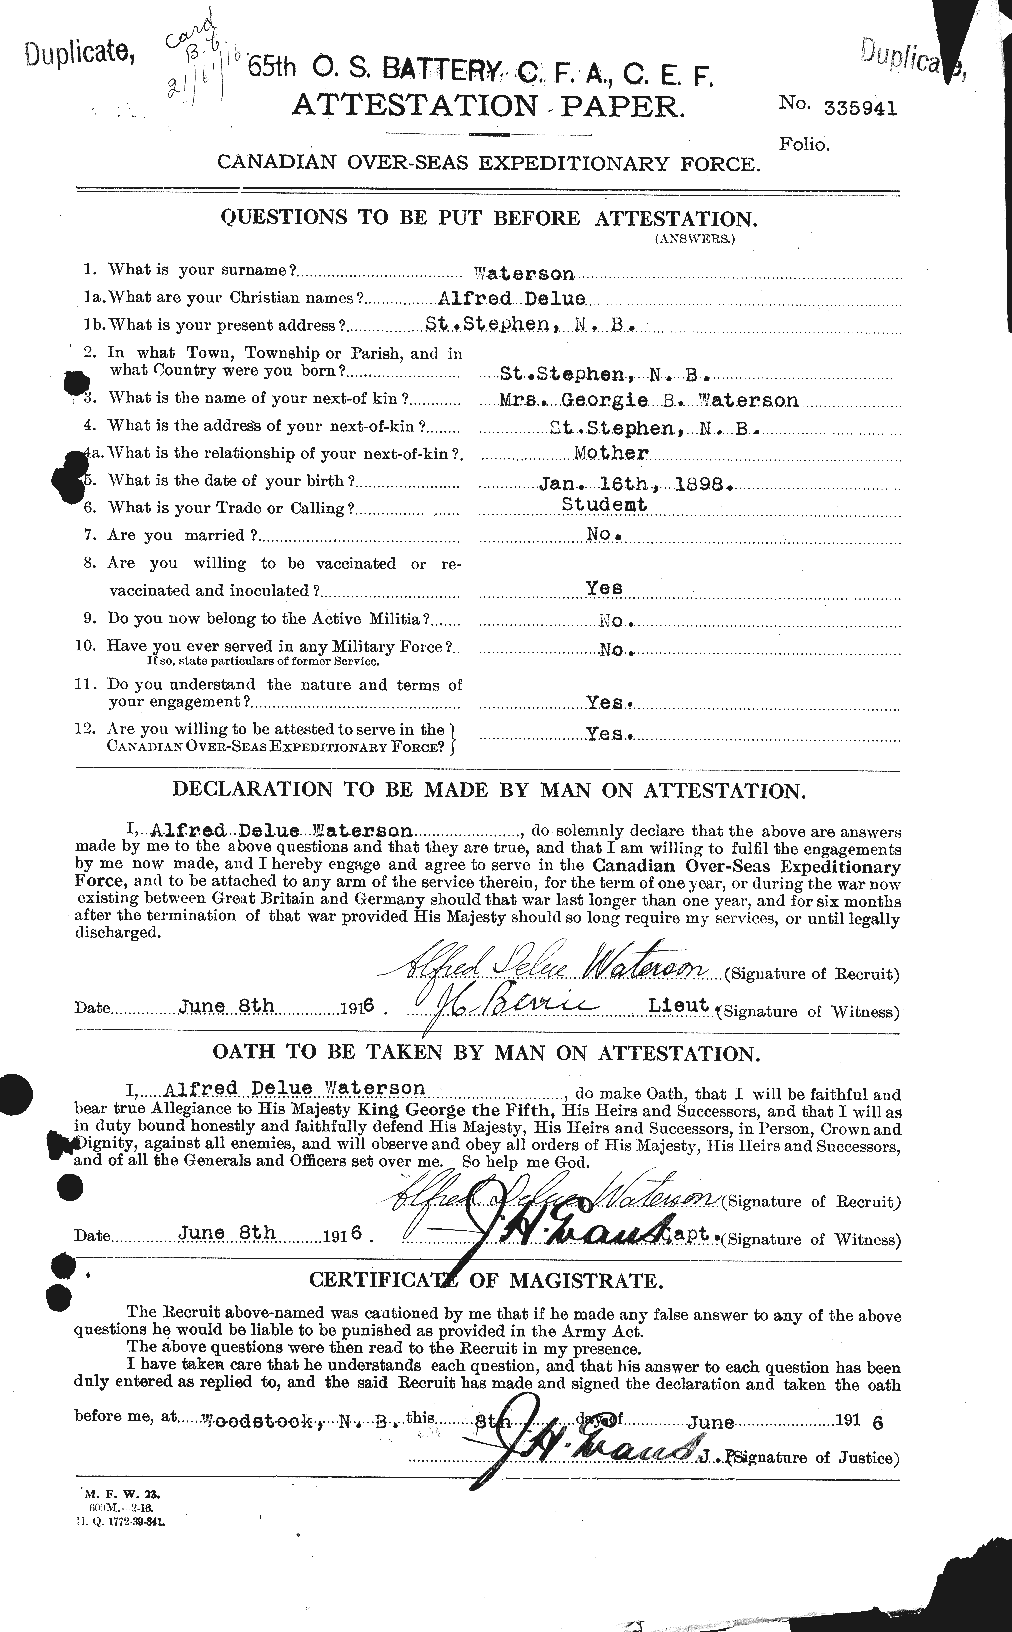 Personnel Records of the First World War - CEF 658294a